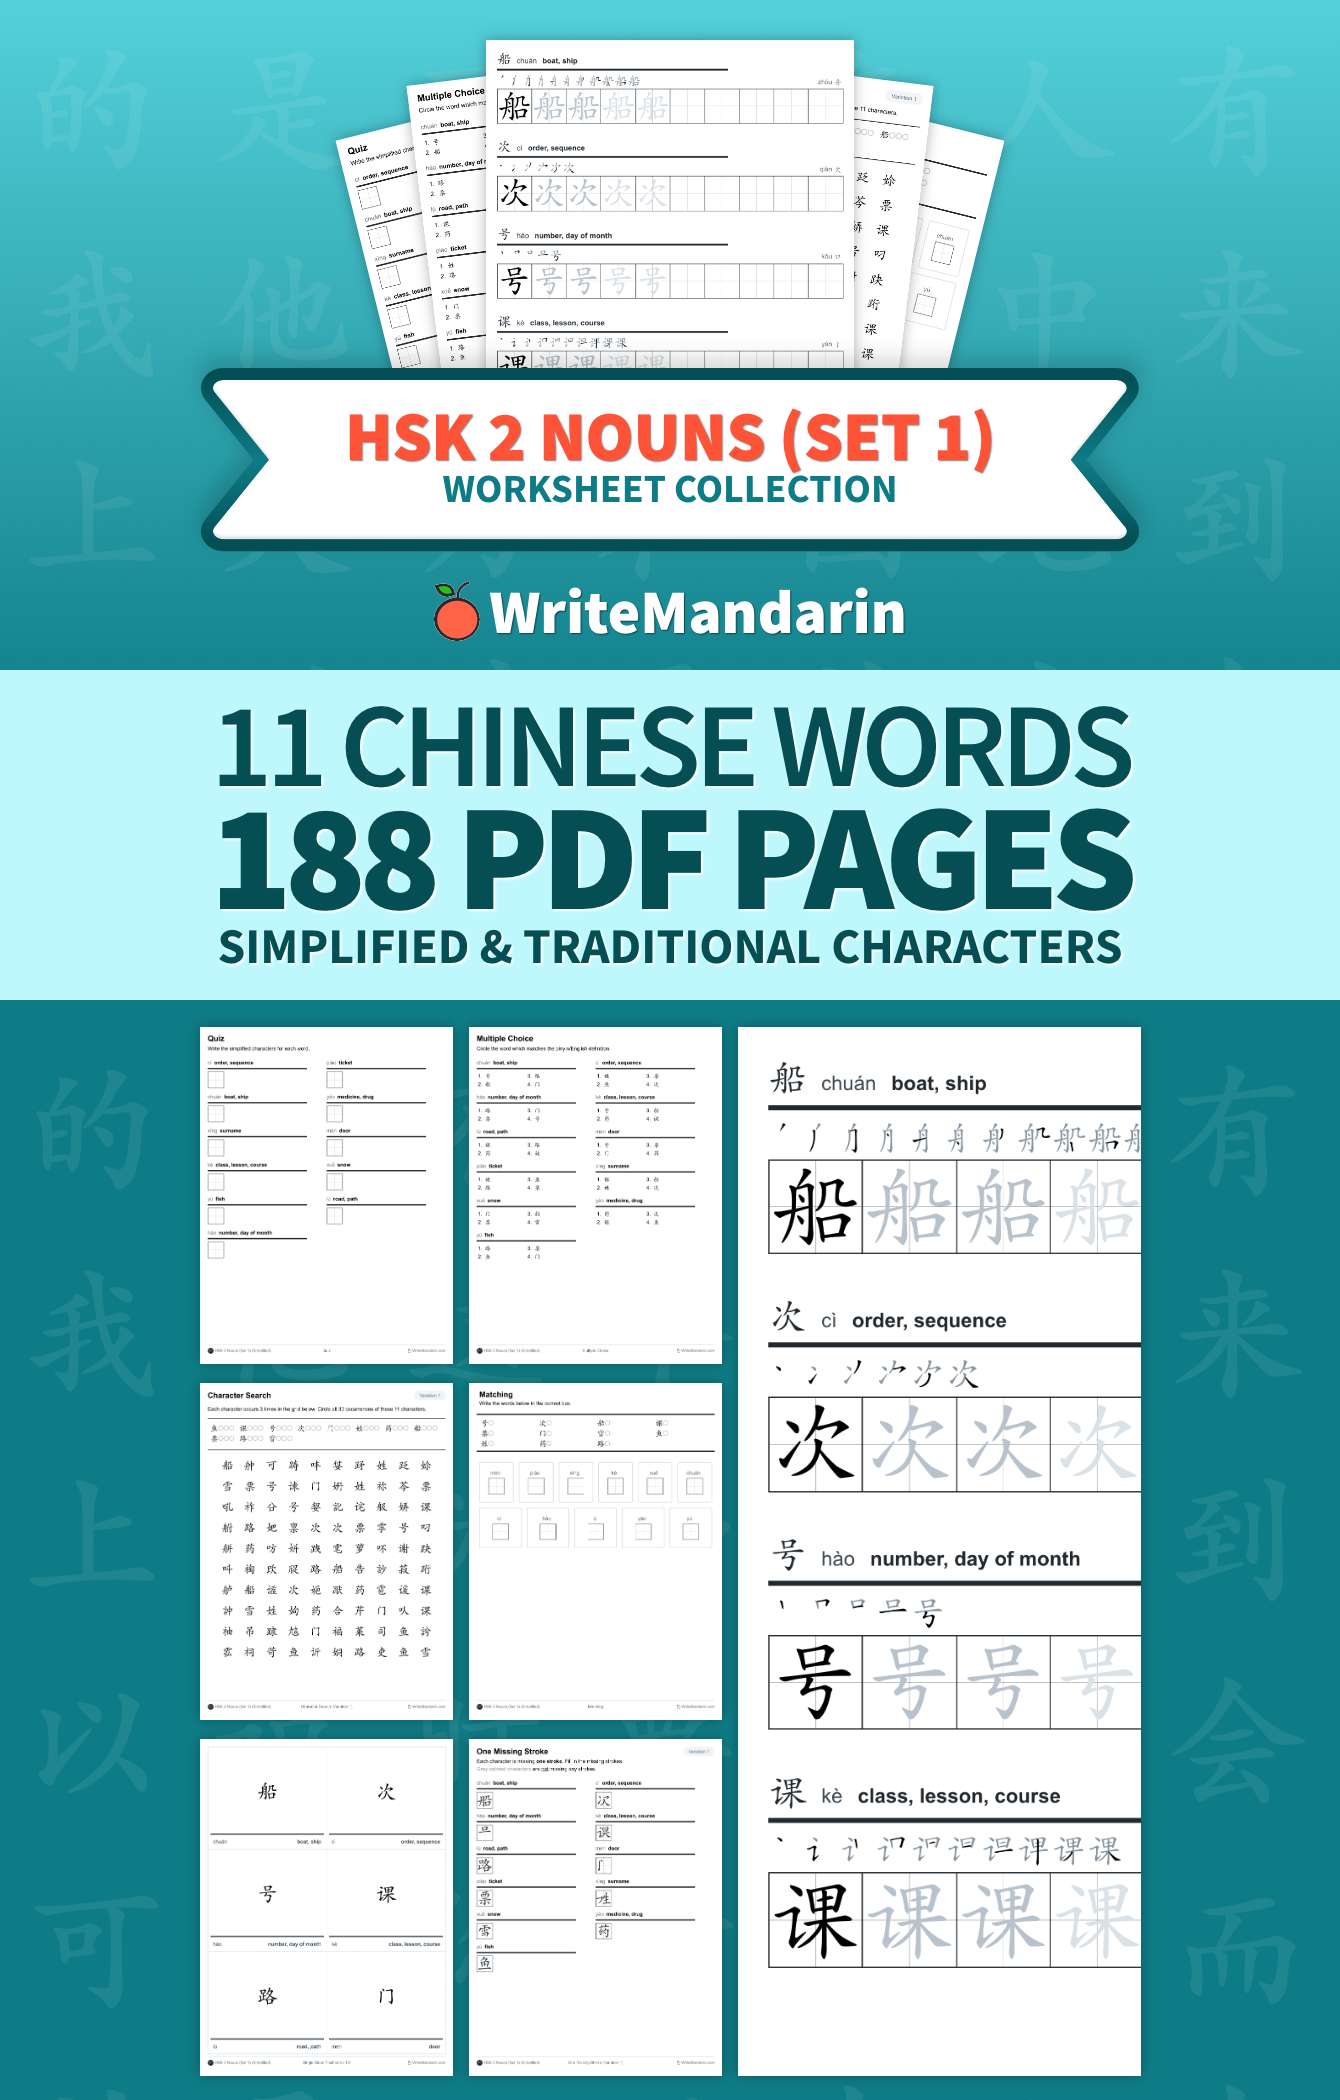 Preview image of HSK 2 Nouns (Set 1) worksheet collection